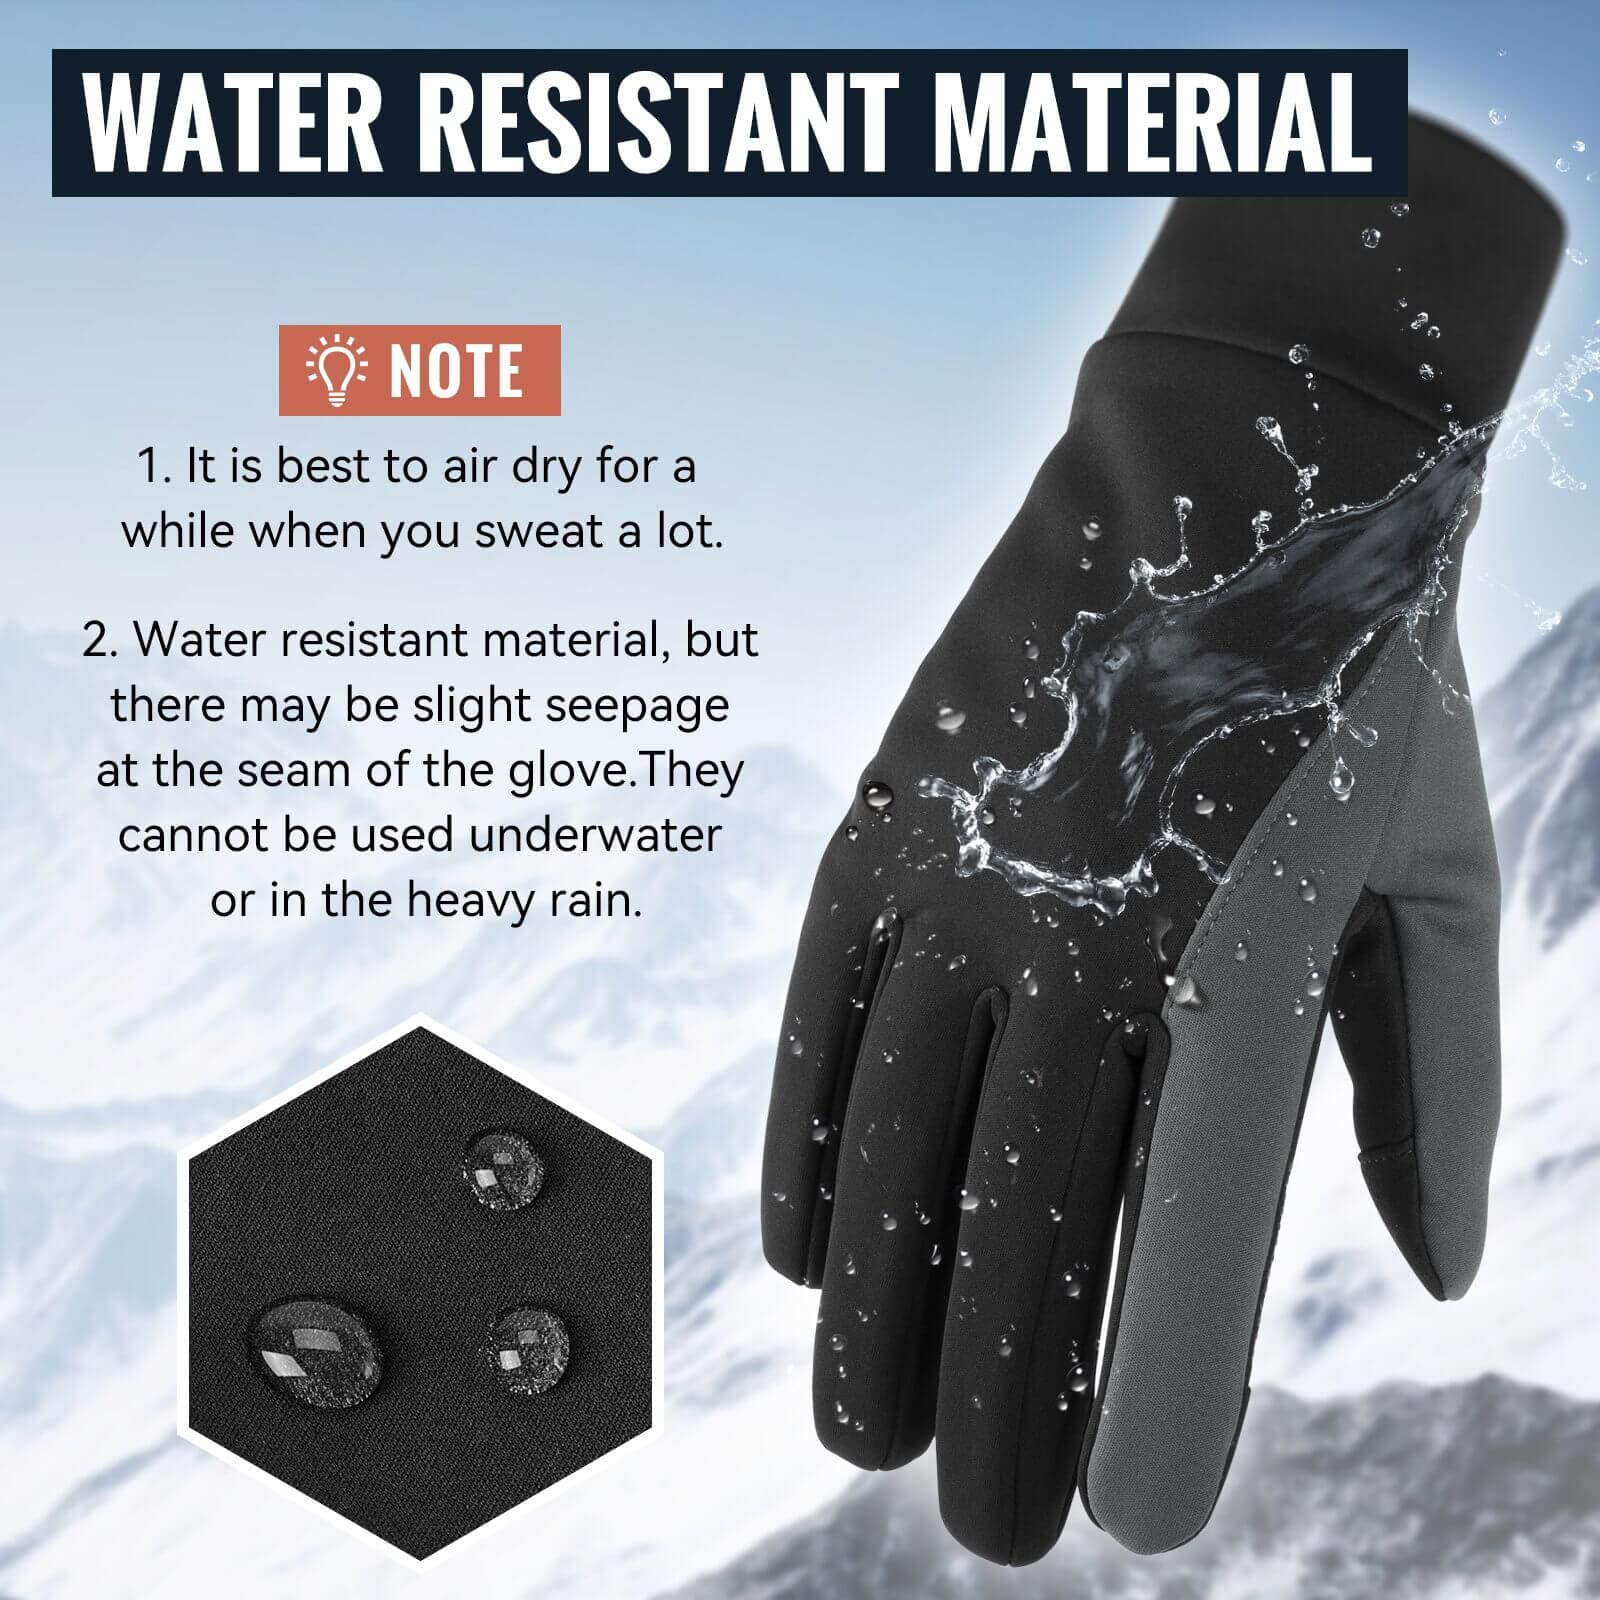 OZERO Winter Thermal Gloves Men Women Touch Screen Water Resistant Windproof Anti Slip Heated Glove Hands Warm for Hiking Driving Running Bike Cycling